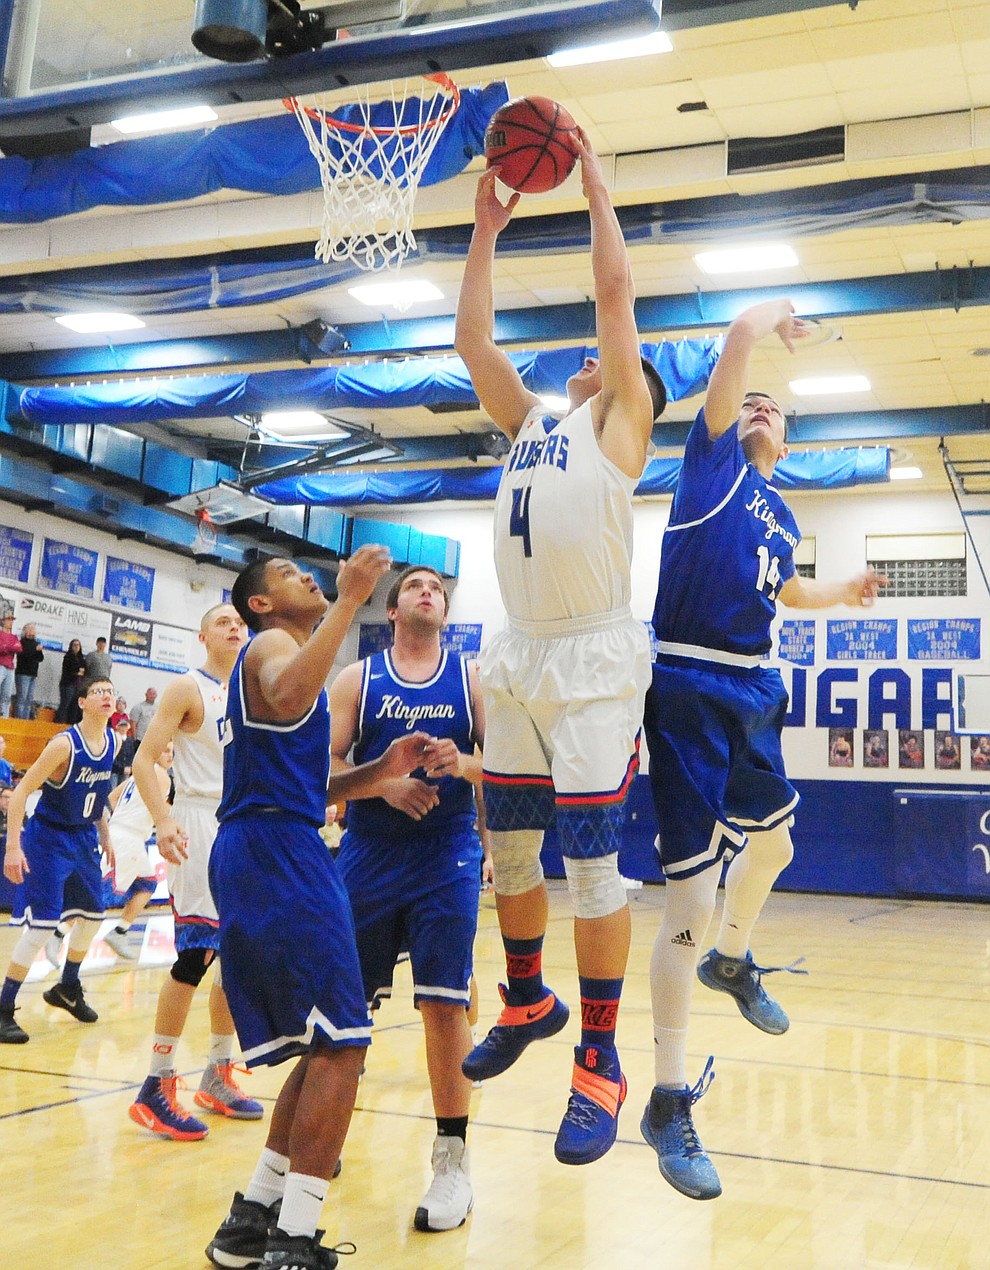 Chino Valley's Jaydon Loftin goes hard to the hoop as the Cougars take on the Kingman Bulldogs Tuesday, January 10 in Chino Vallley. (Les Stukenberg/The Daily Courier)